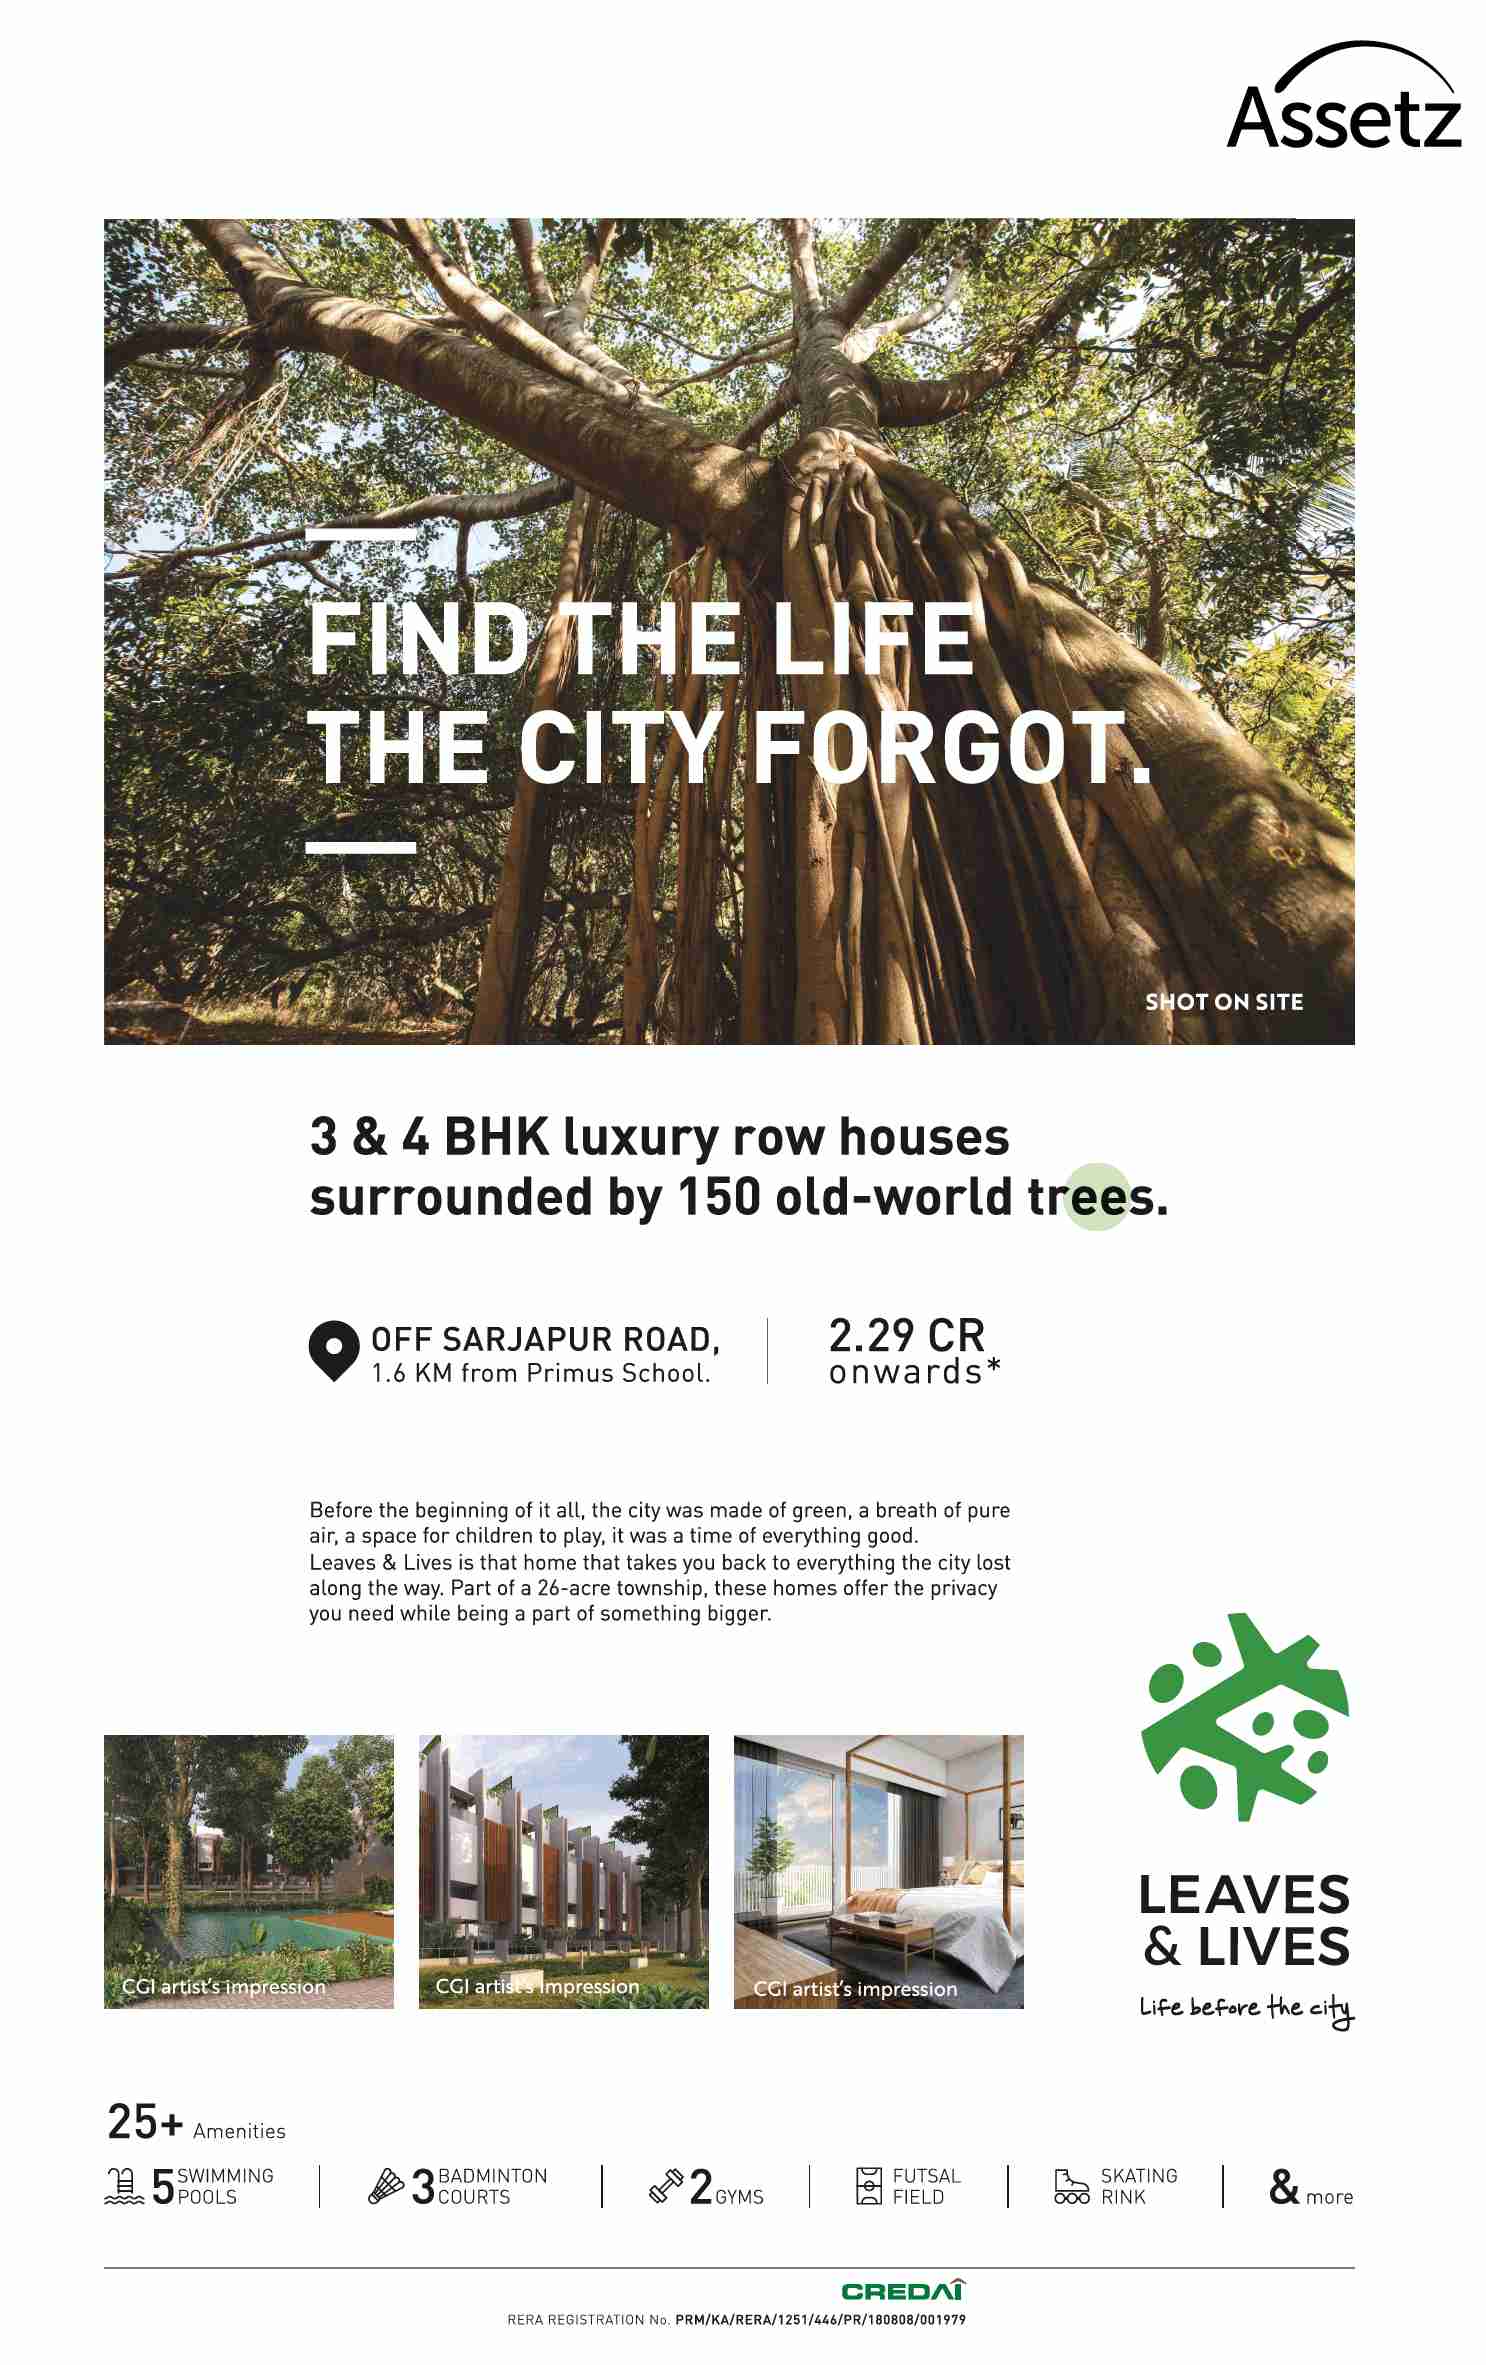 Book luxury row houses starting @ Rs. 2.29 cr. at Assetz Leaves And Lives in Bangalore